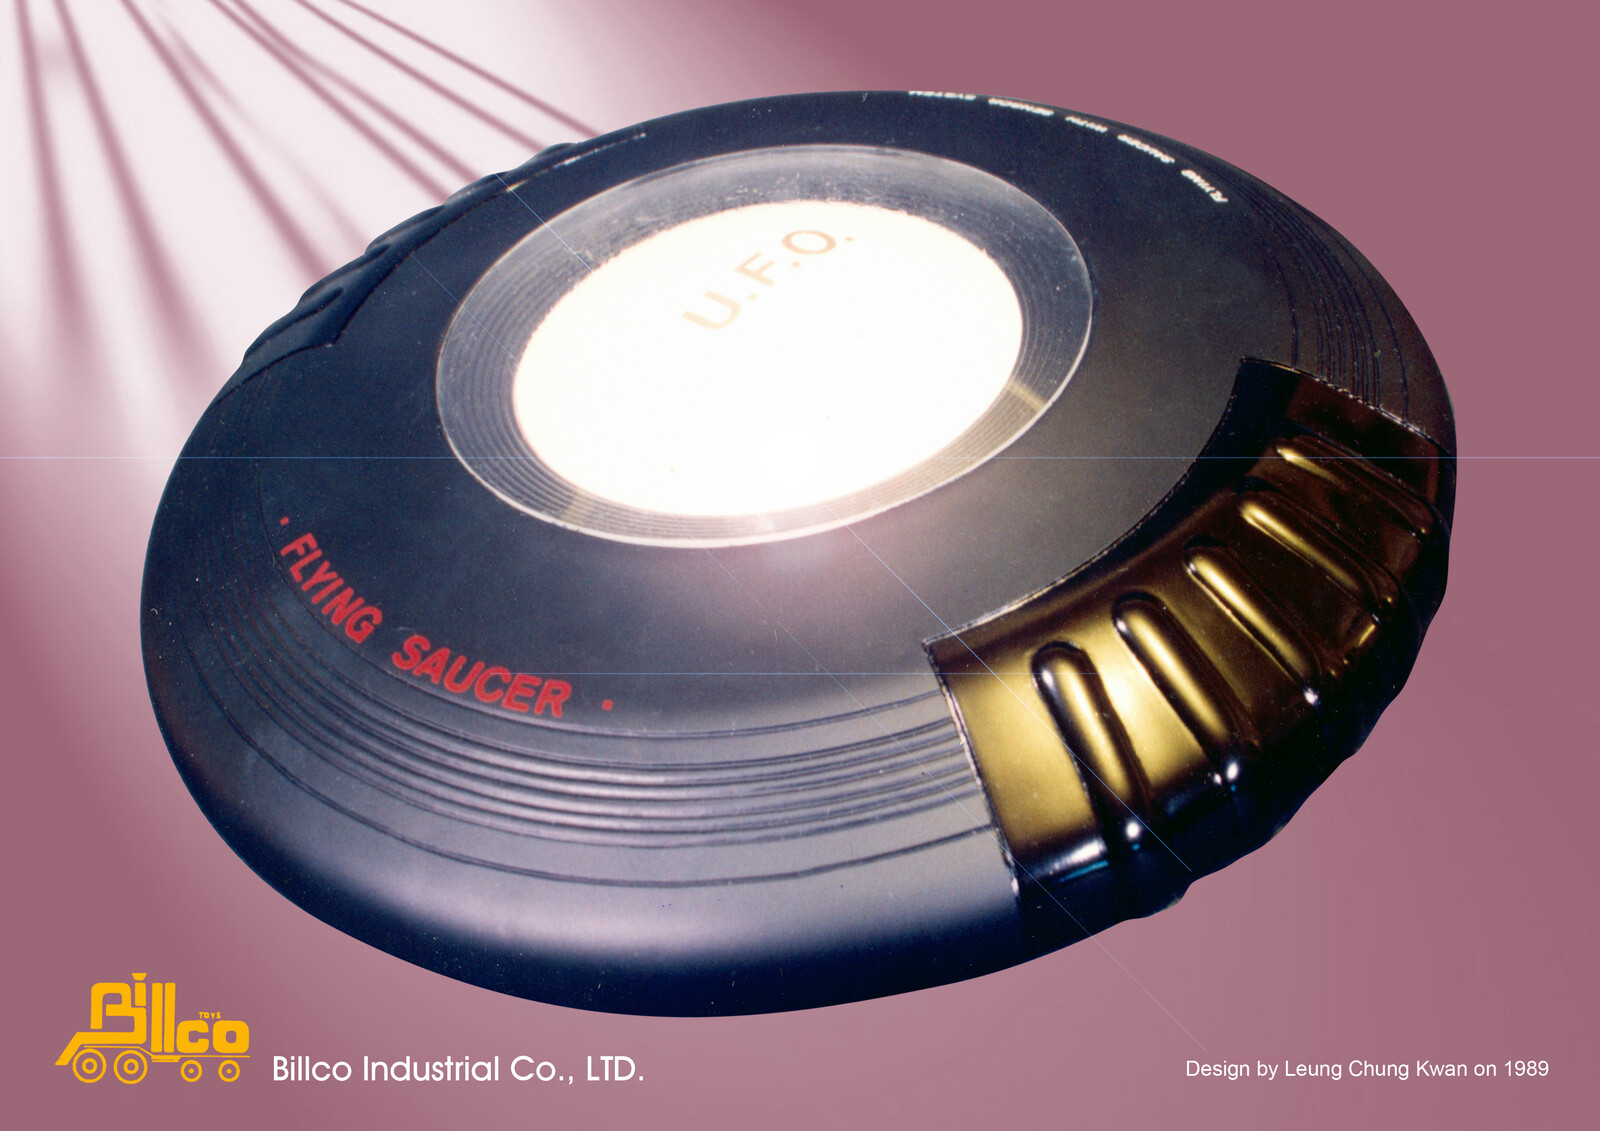 💎 Light-Up Flying Saucer | Design by Leung Chung Kwan on 1989 💎
Brand Name︰BILLCO | Client︰Billco industrial Co., Ltd.